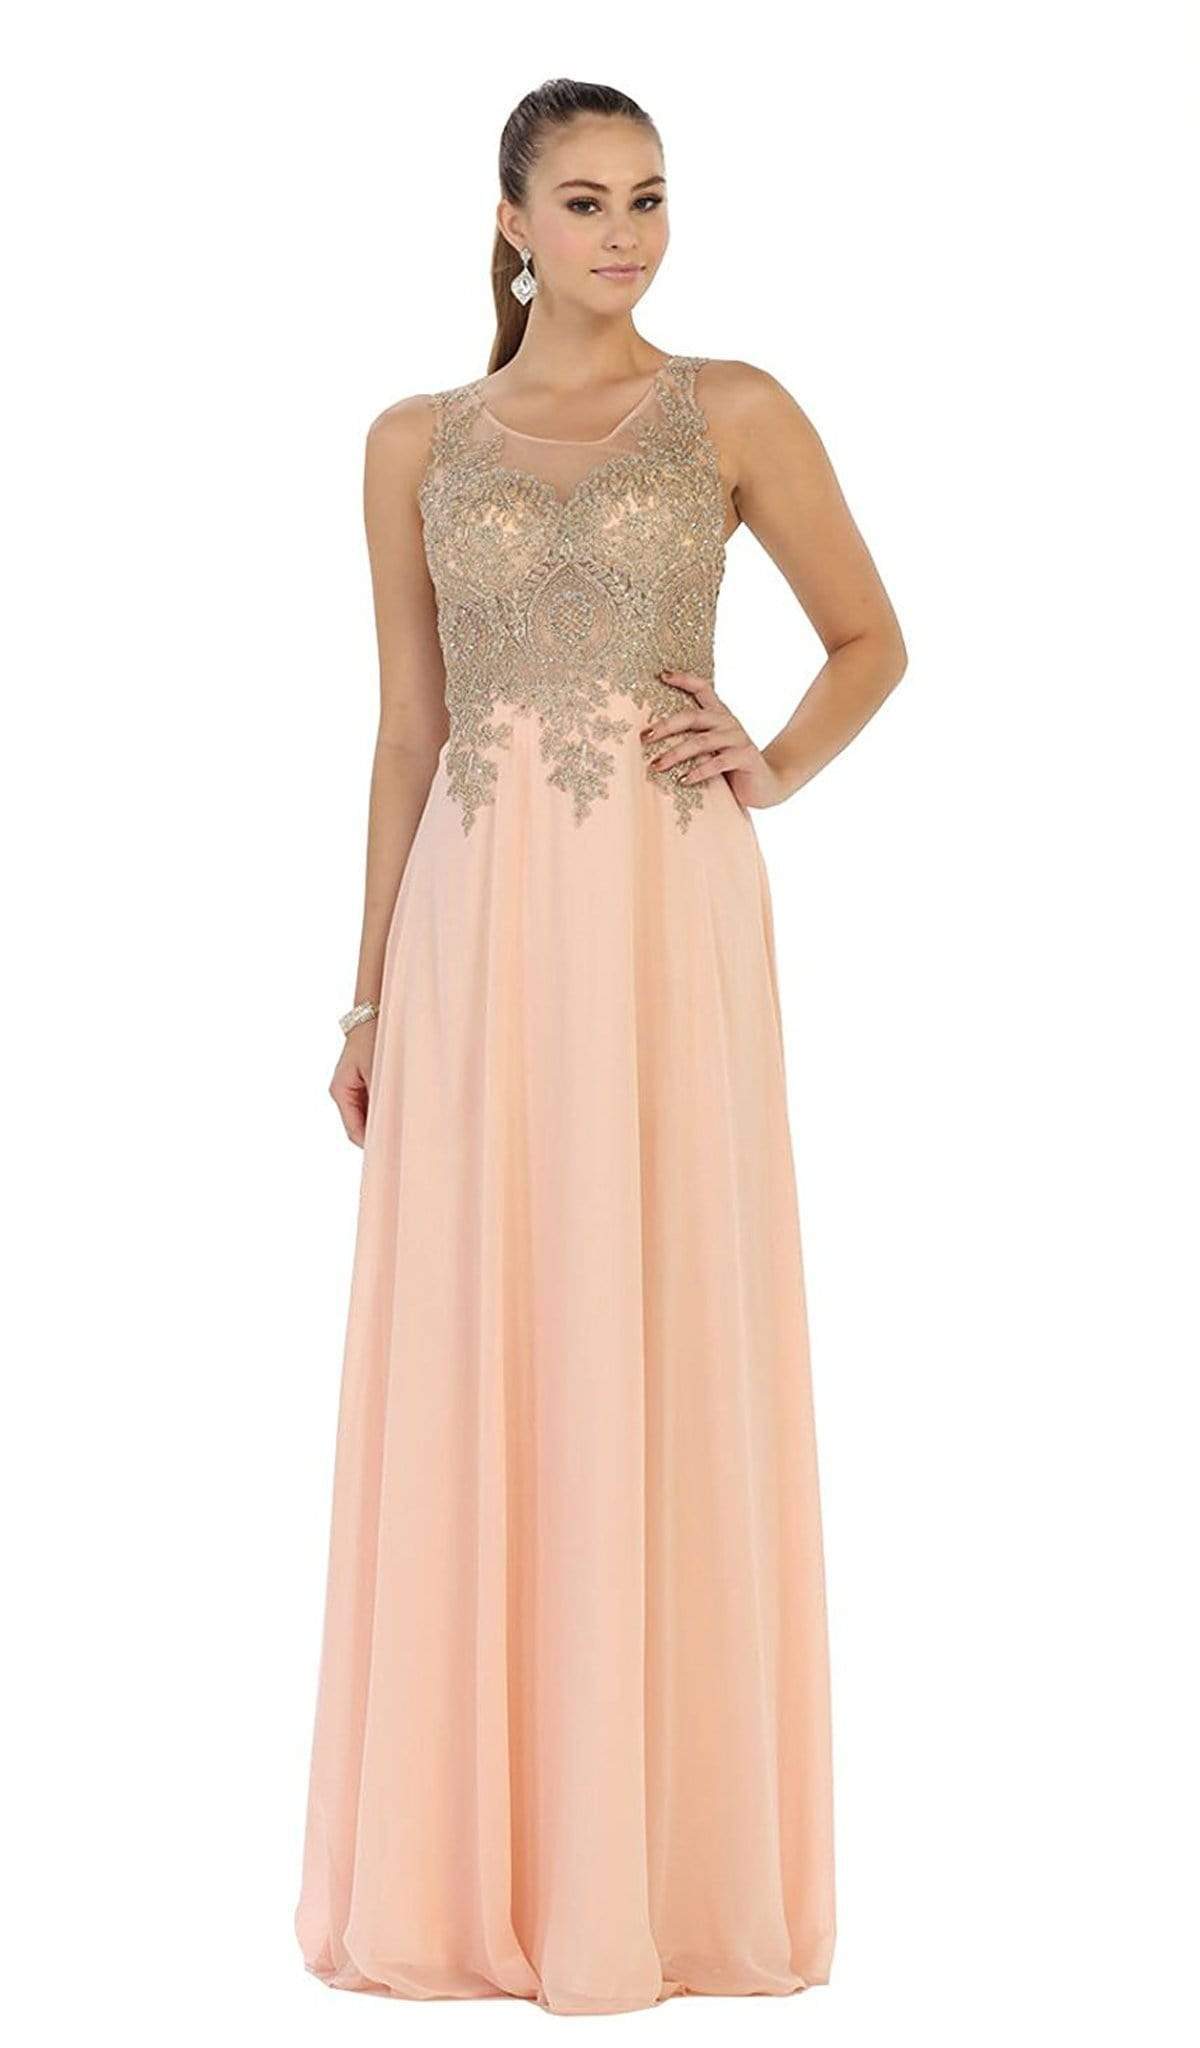 May Queen - Illusion Ornate Lace Prom Gown Special Occasion Dress 4 / Blush